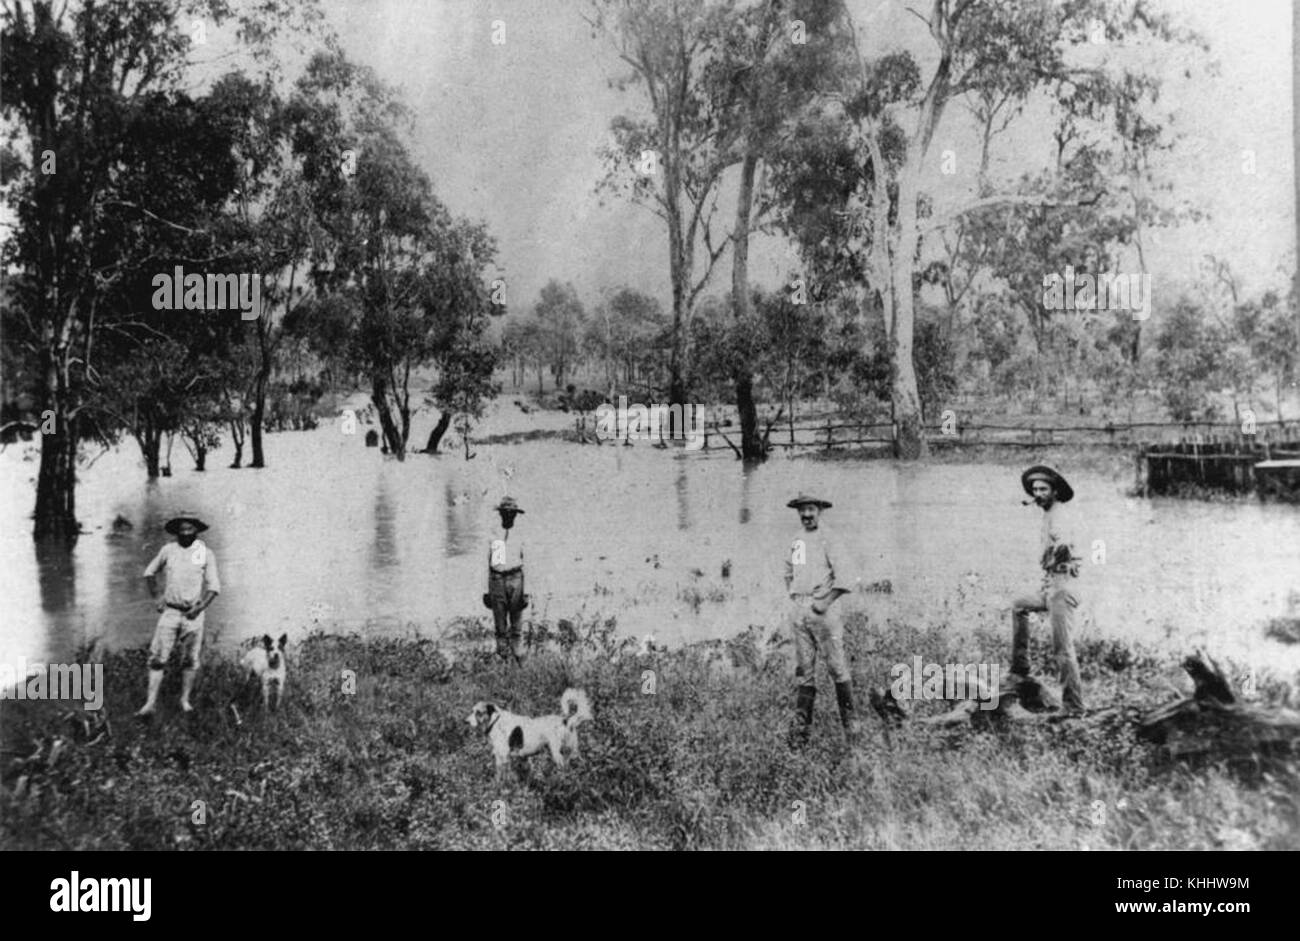 1 92040 Floods in Winton during the 1890s Stock Photo - Alamy